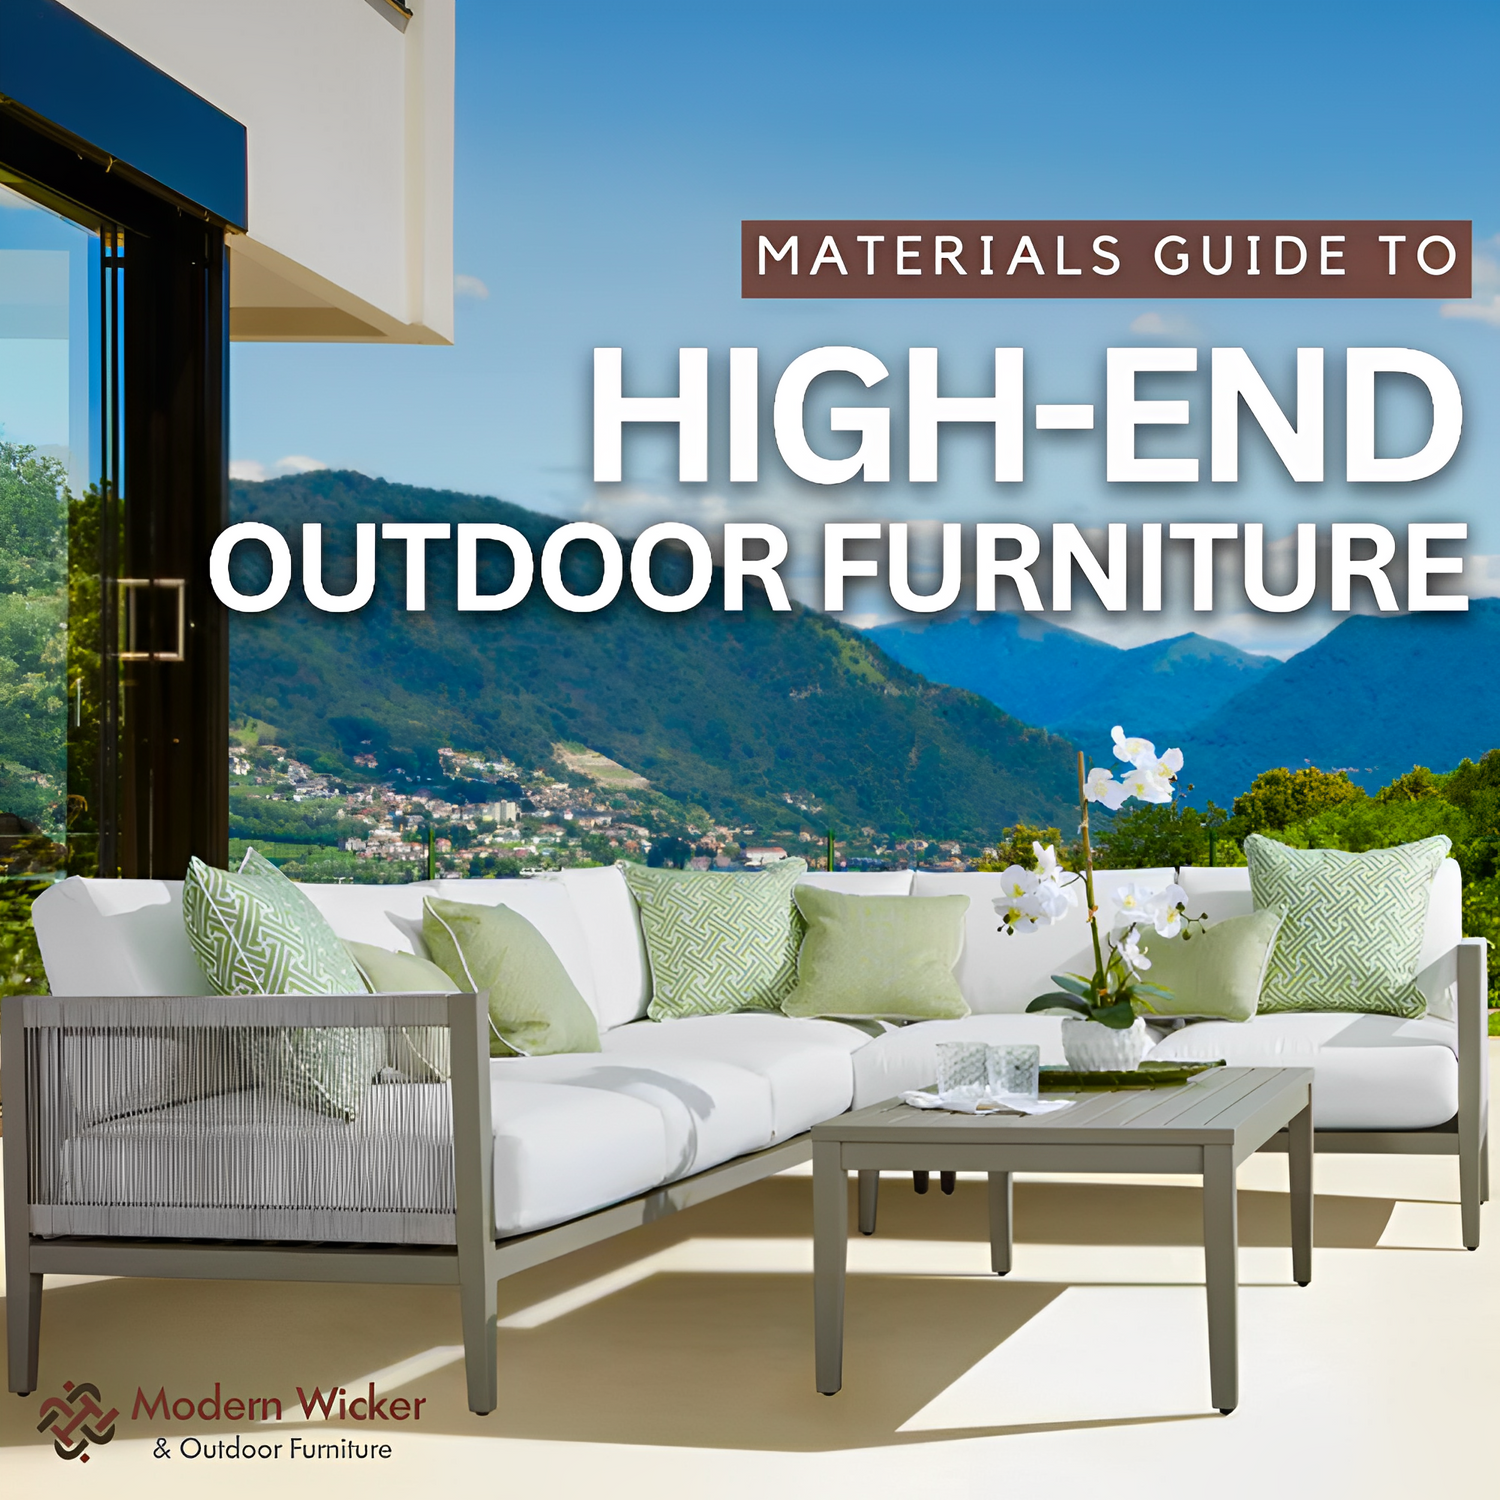 Materials Guide to High-End Outdoor Furniture